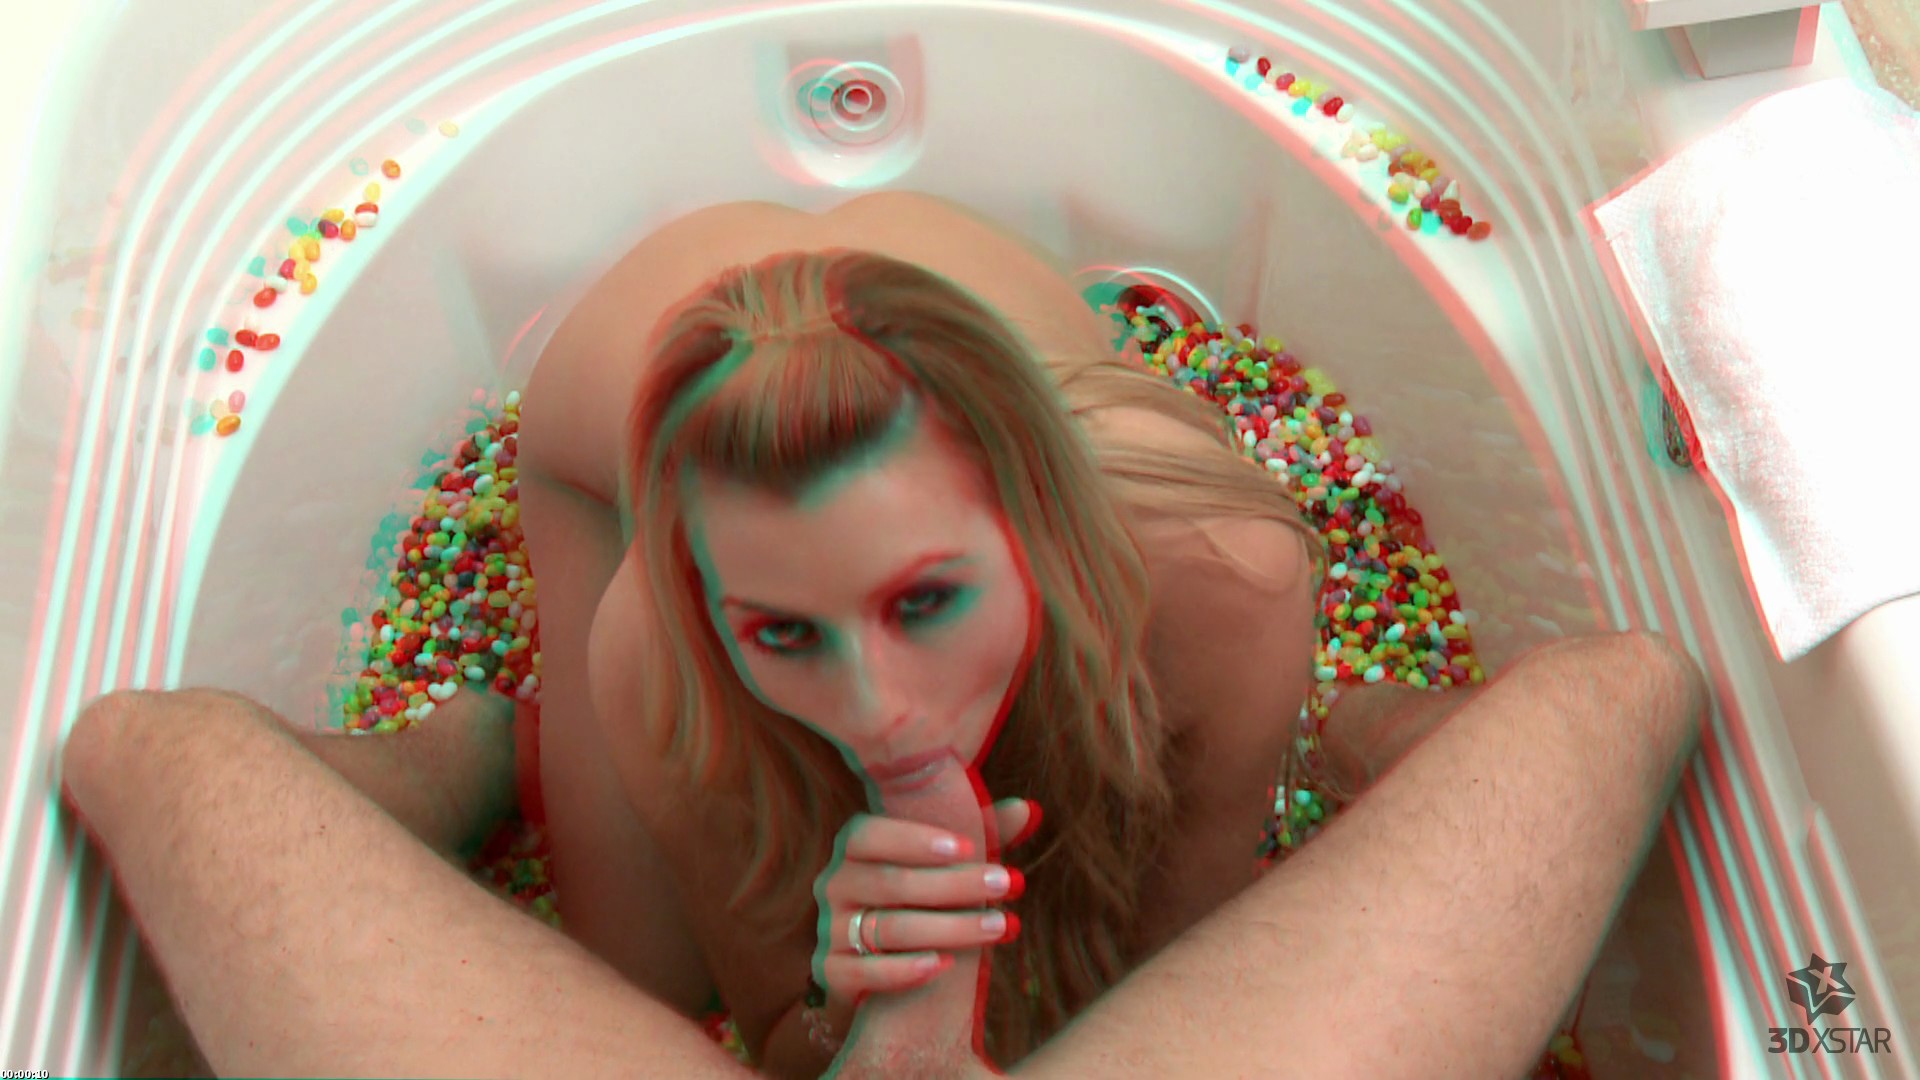 3d Anaglyph Blowjob - Get 3d Anaglyph Porno for free - www.youpornres...